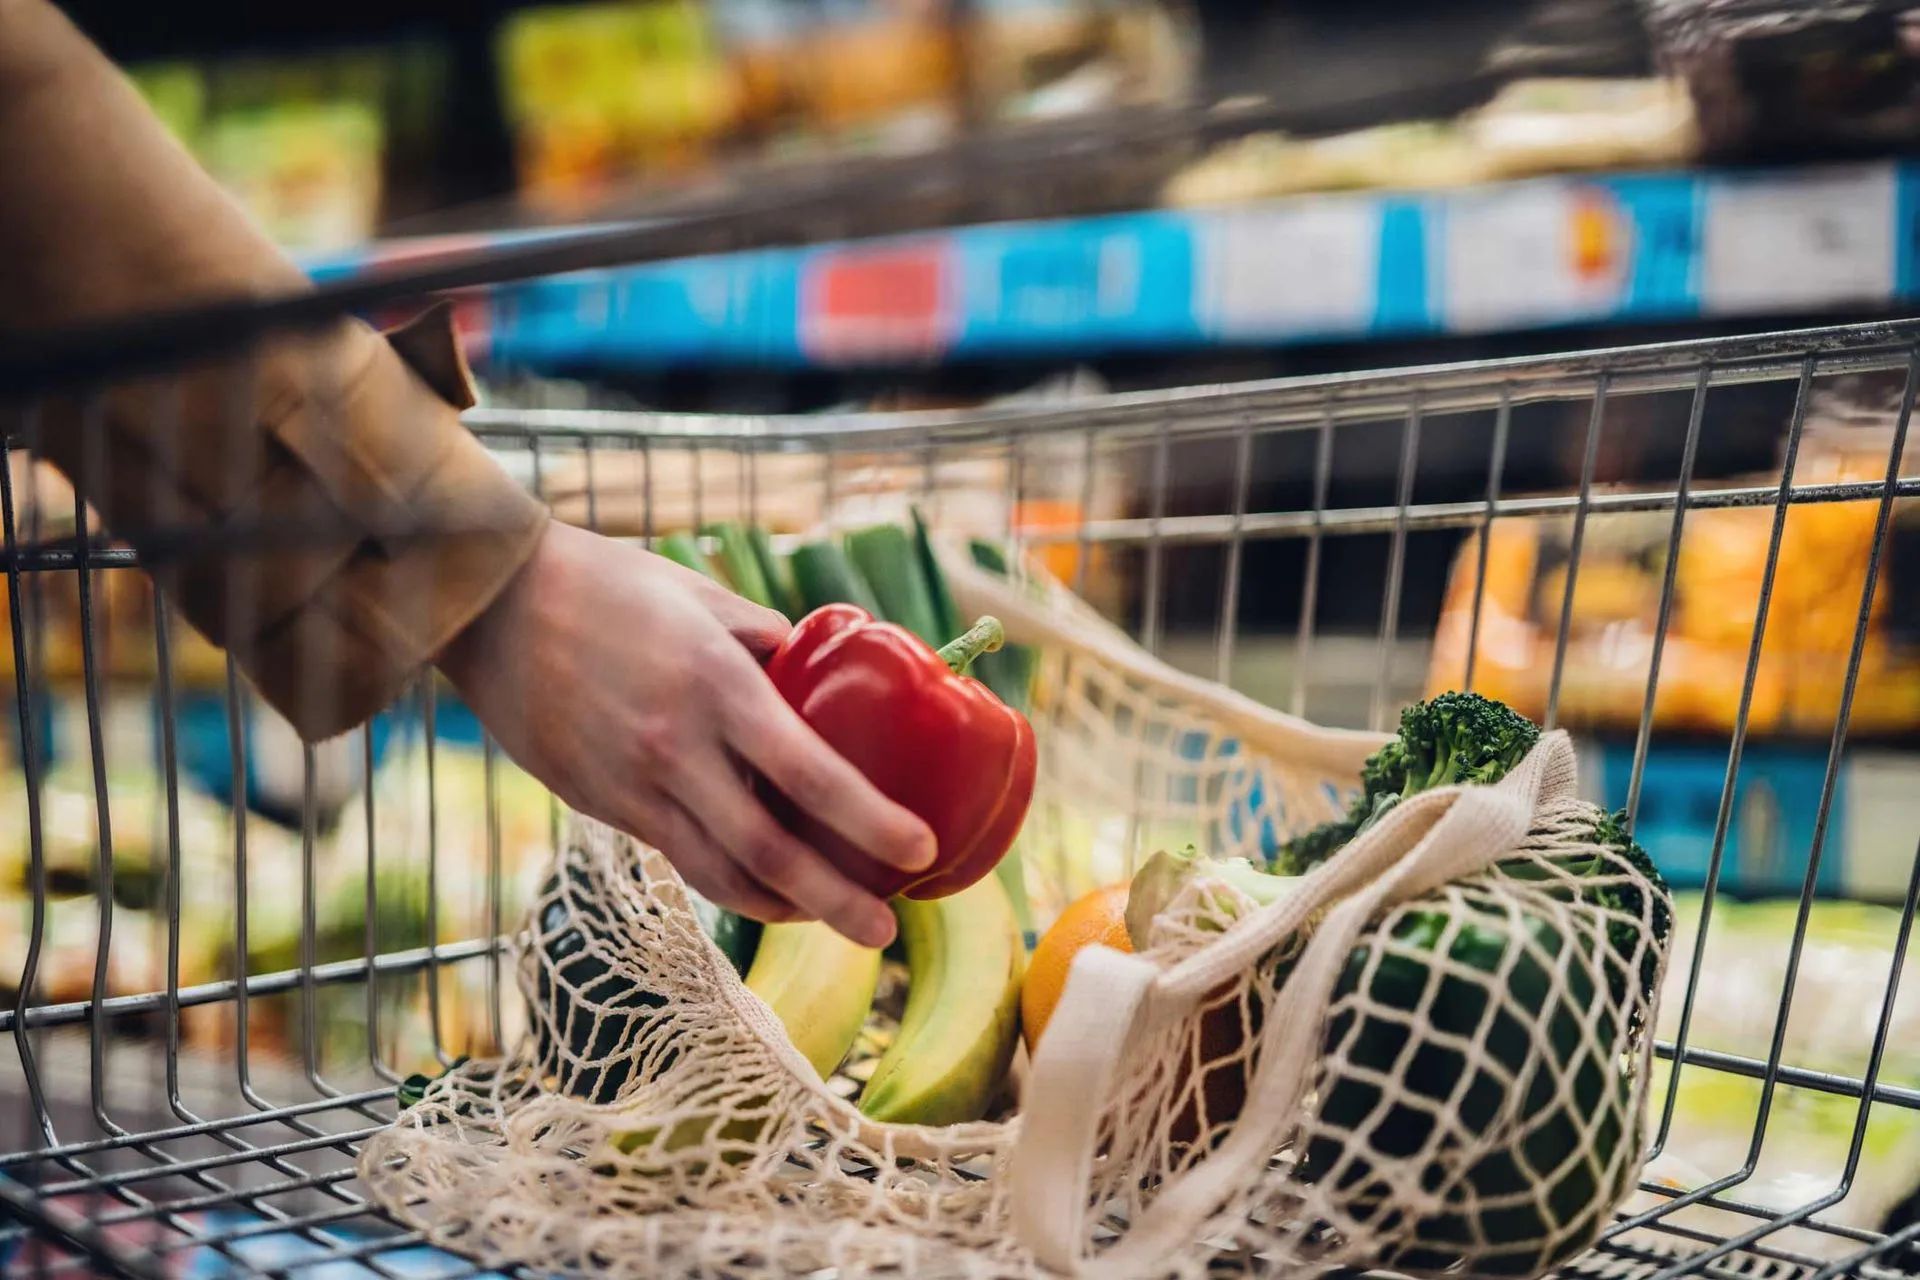 a person is putting a red pepper in a shopping cart filled with vegetables